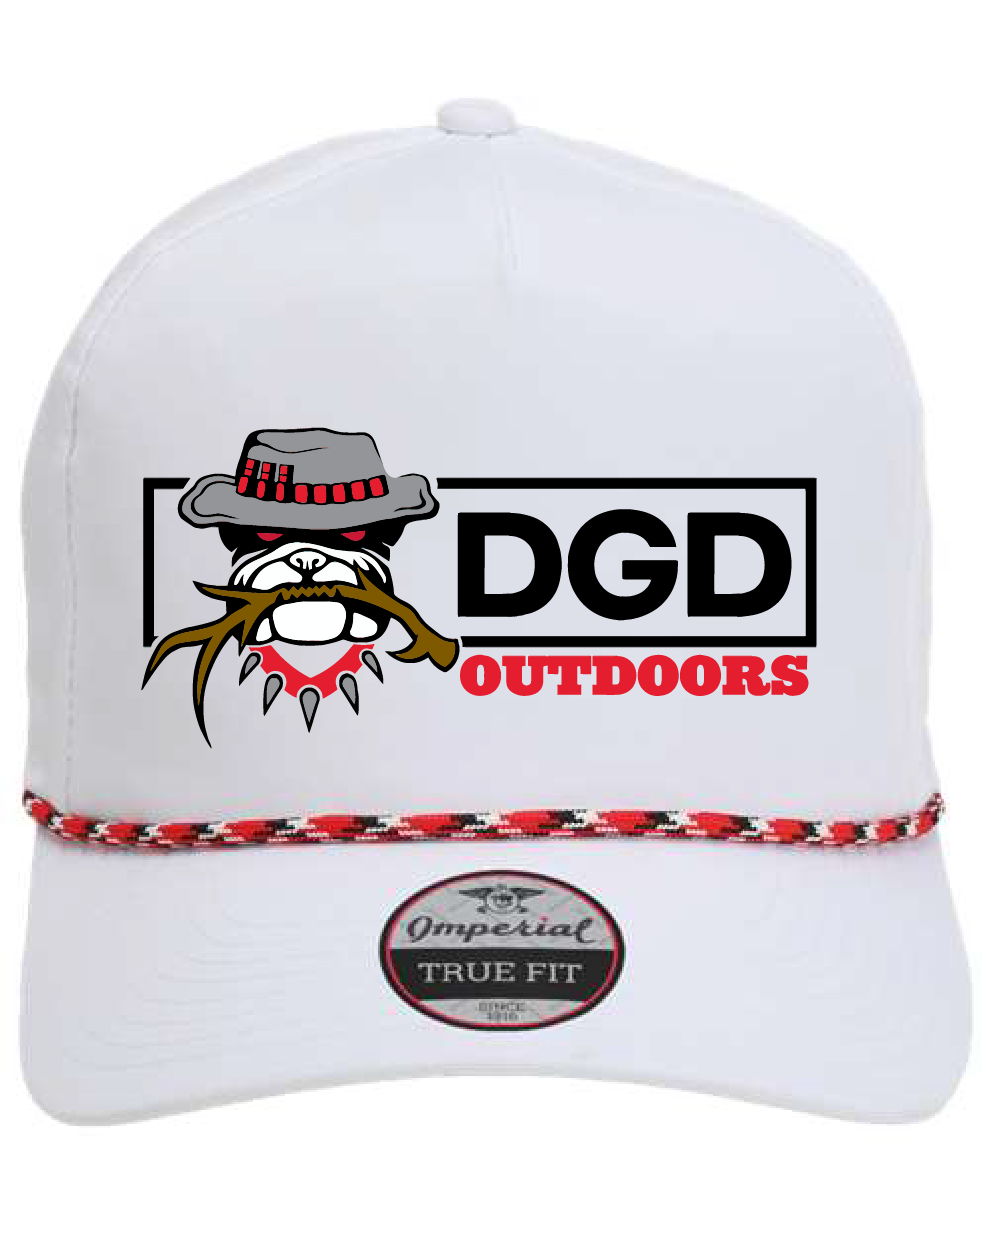 DGD Golf rope hat